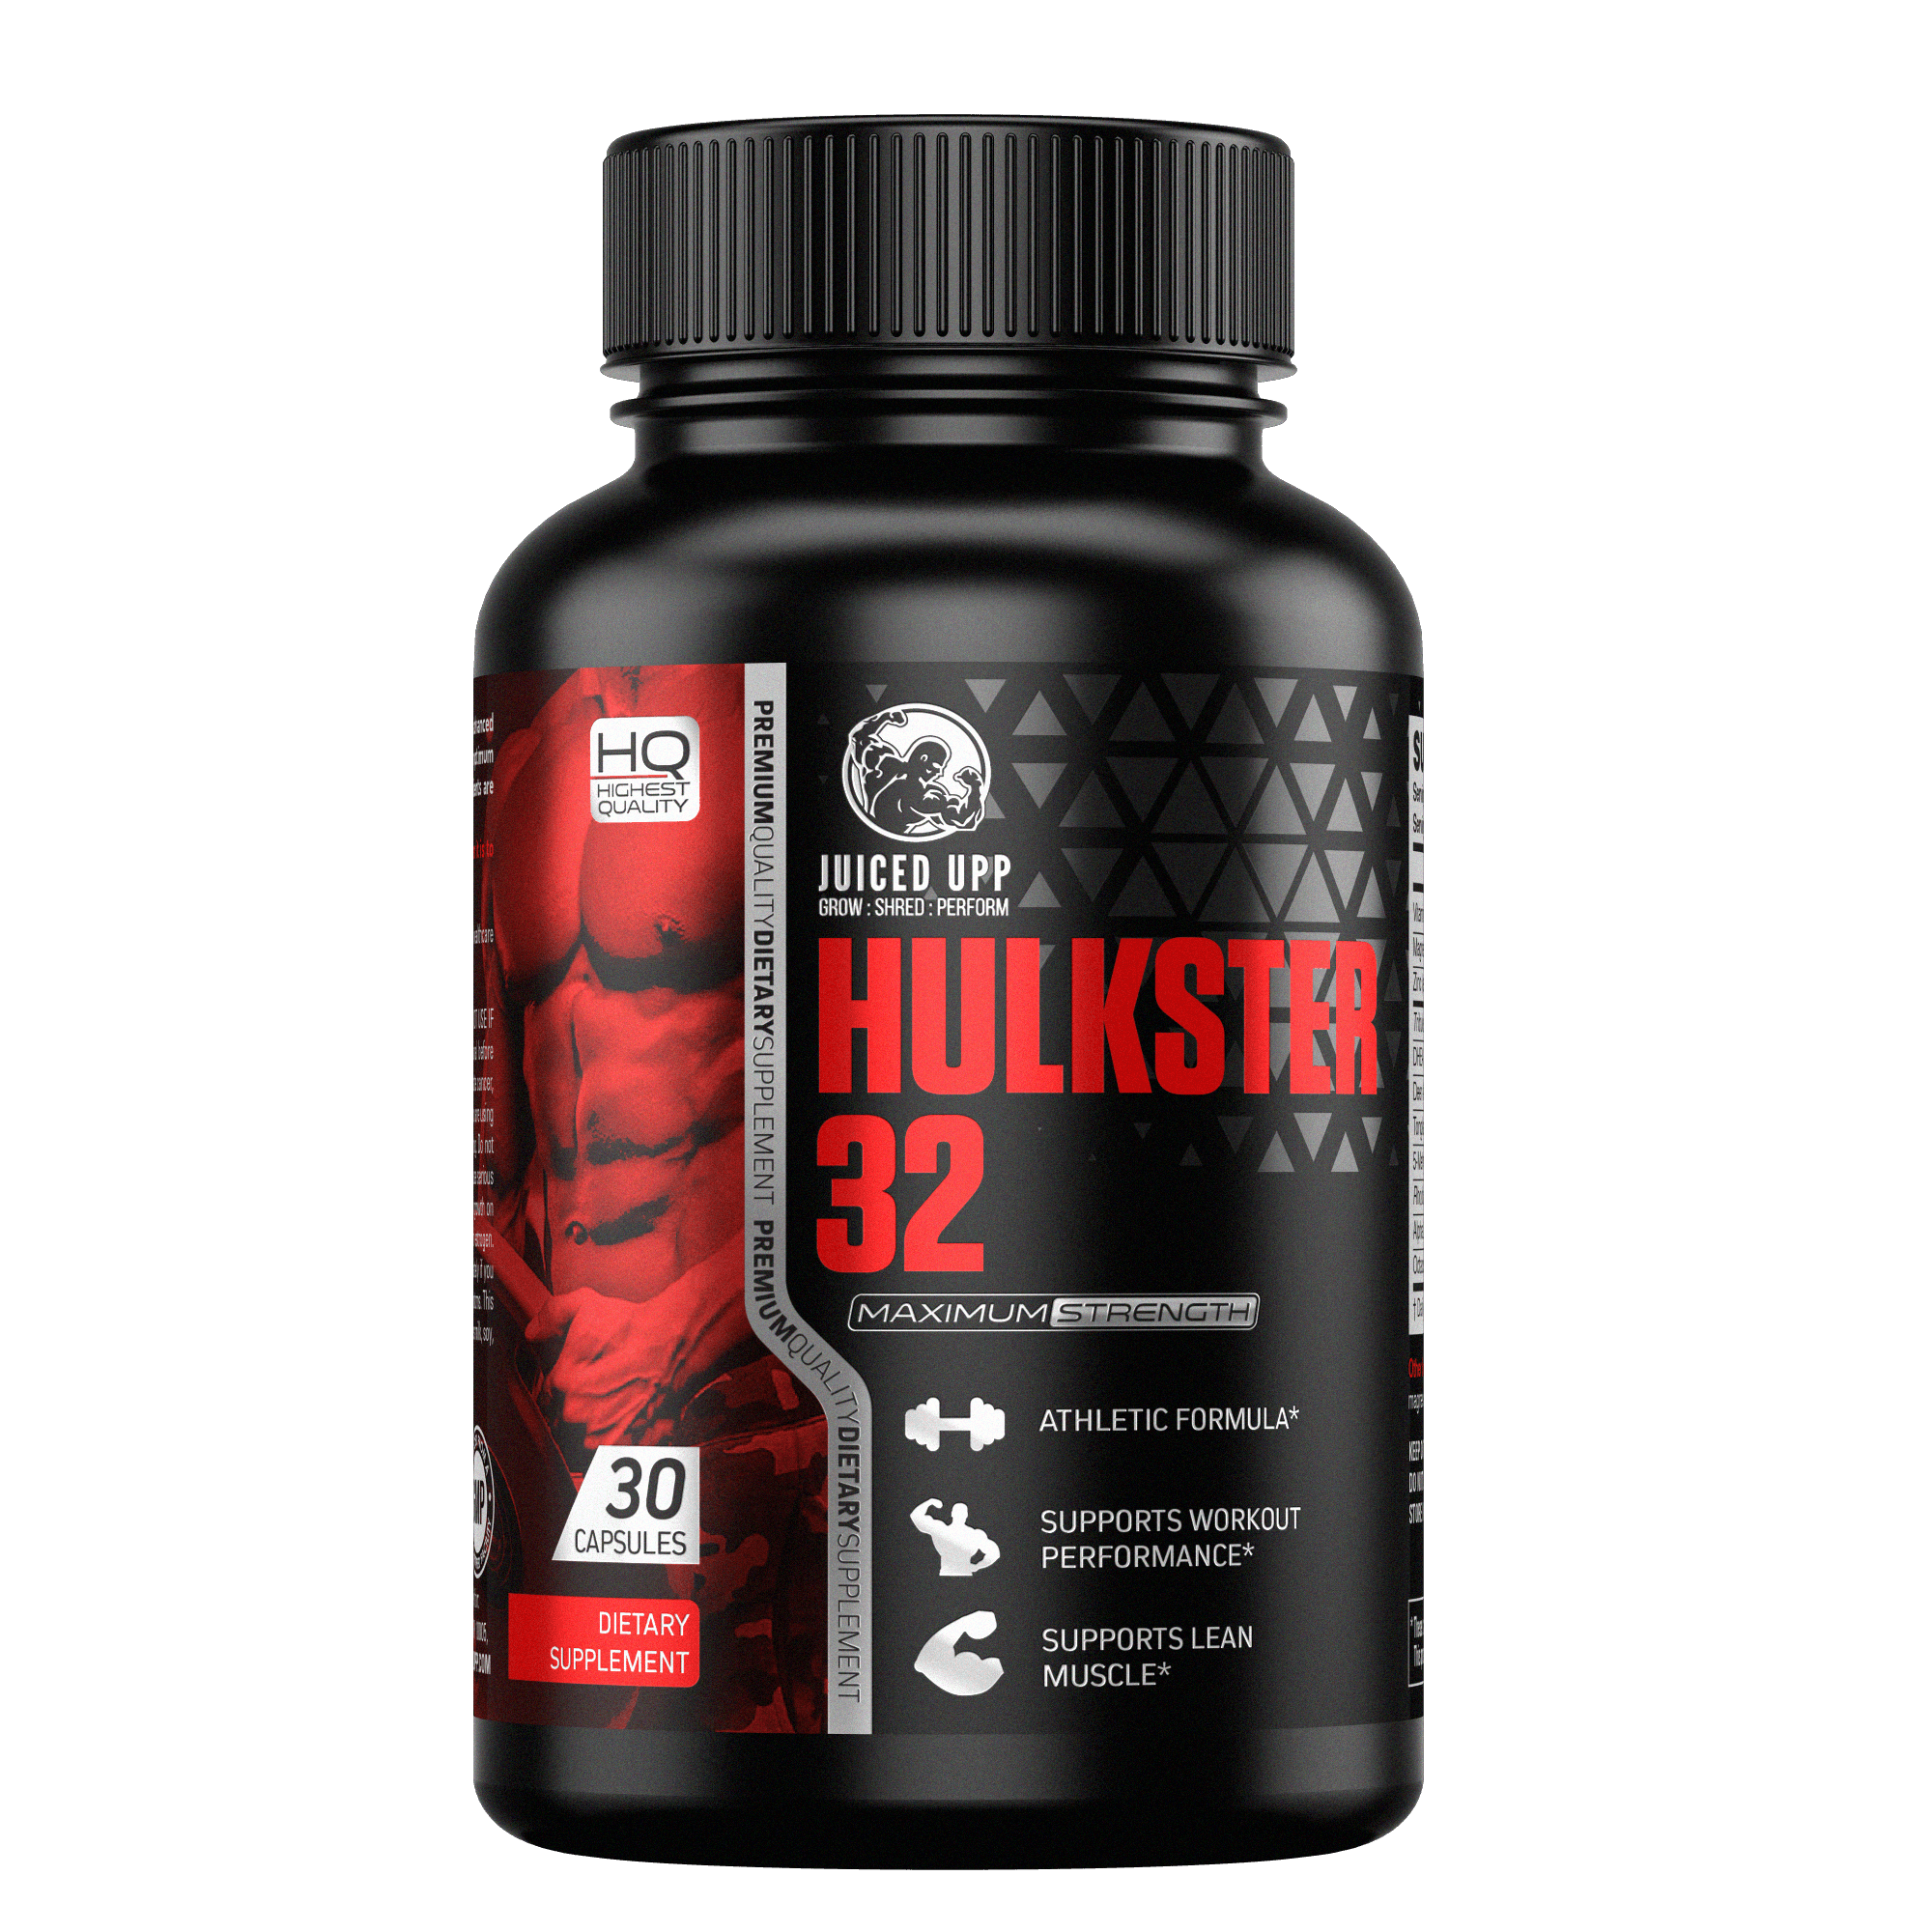 HULKSTER 32 - Juiced Upp - 100% Natural Fitness and Wellbeing Supplements